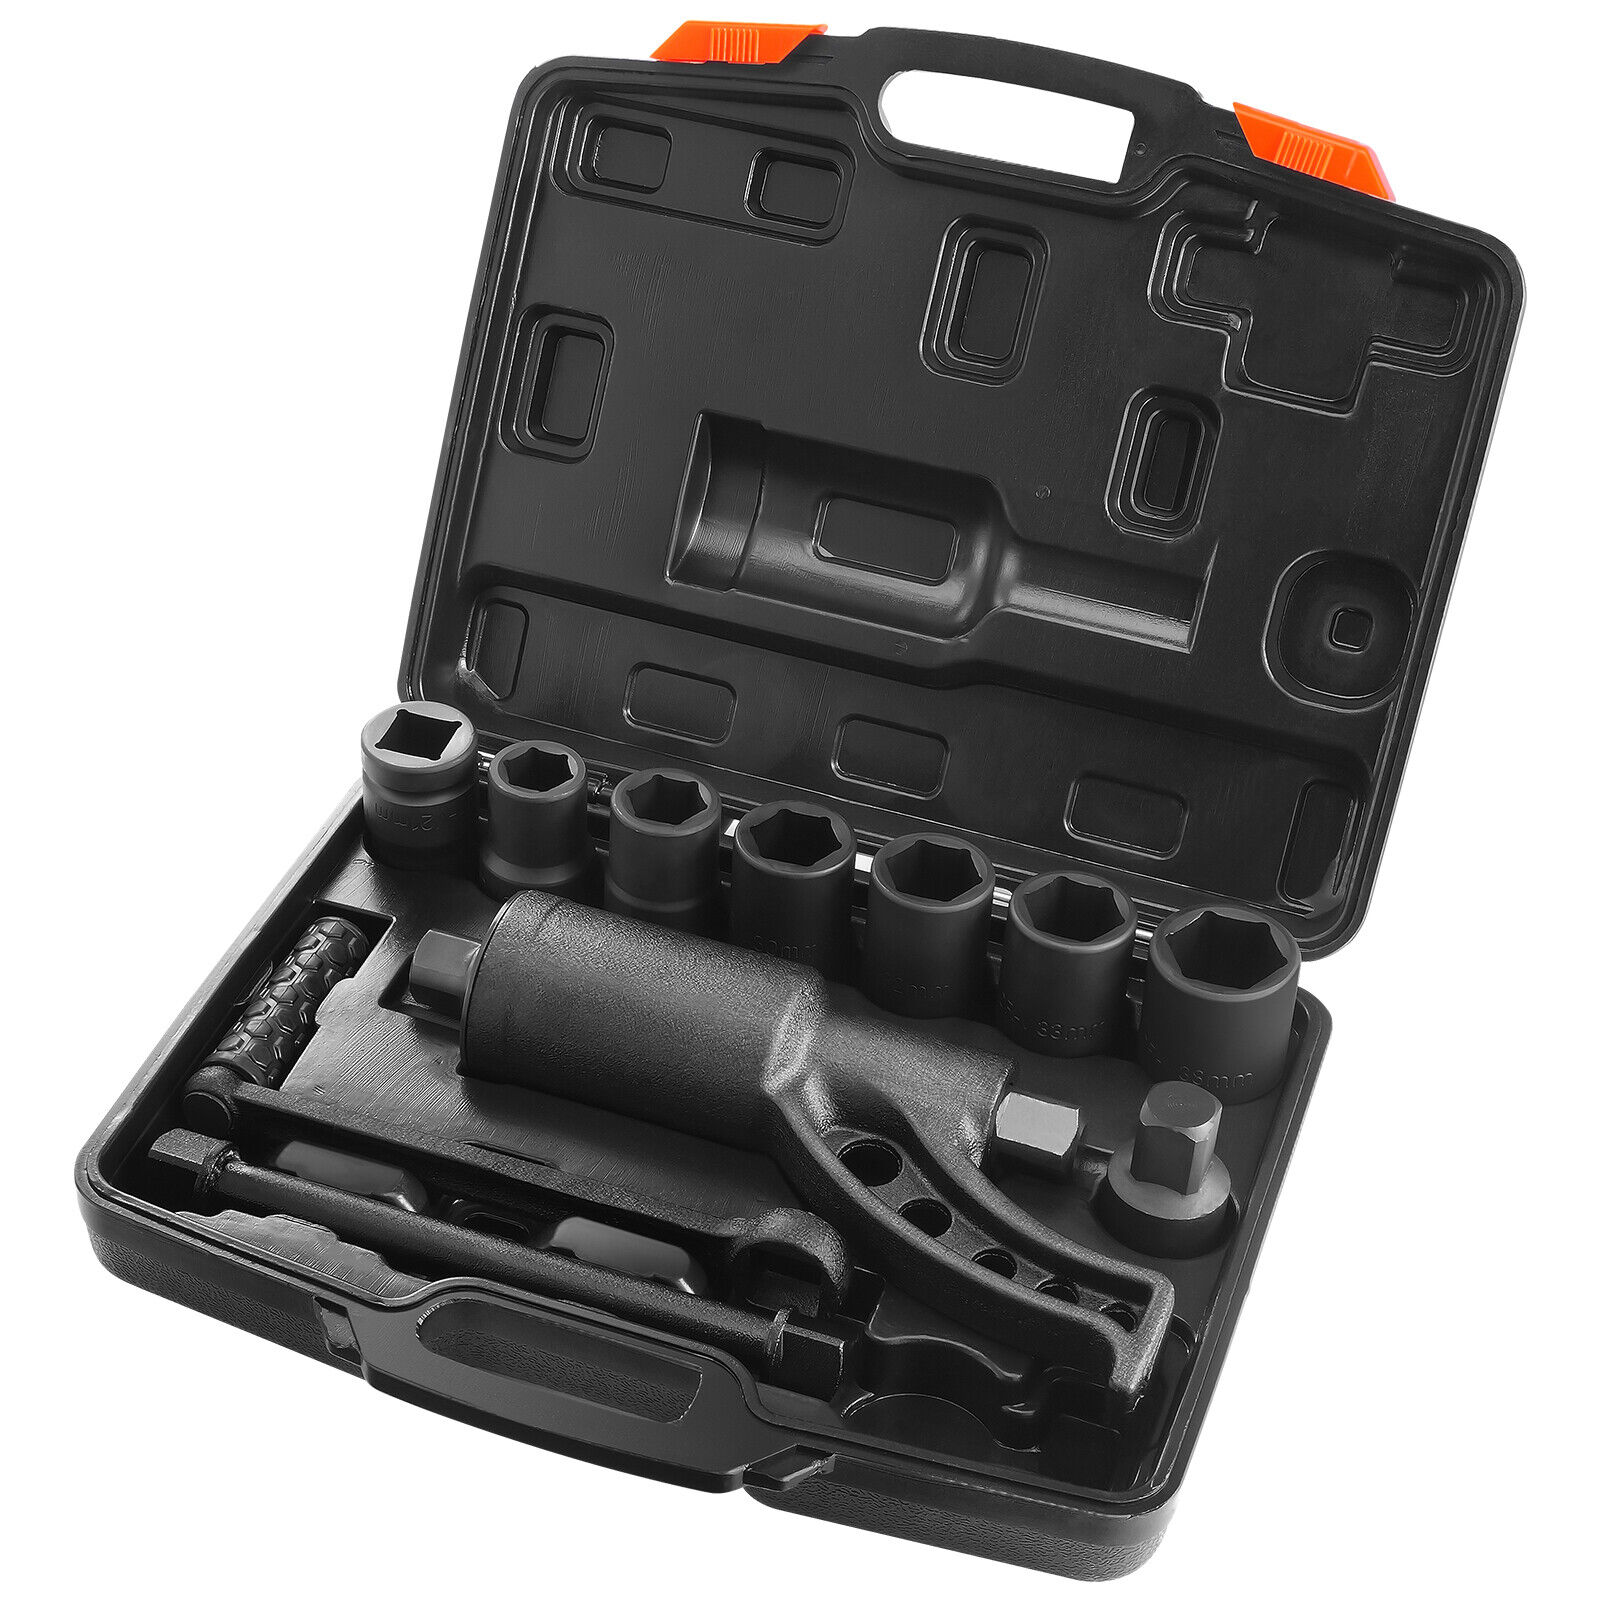 Torque Multiplier Set 1:64 Wrench Lug Nut Labor Saving Lugnuts with 8 Sockets